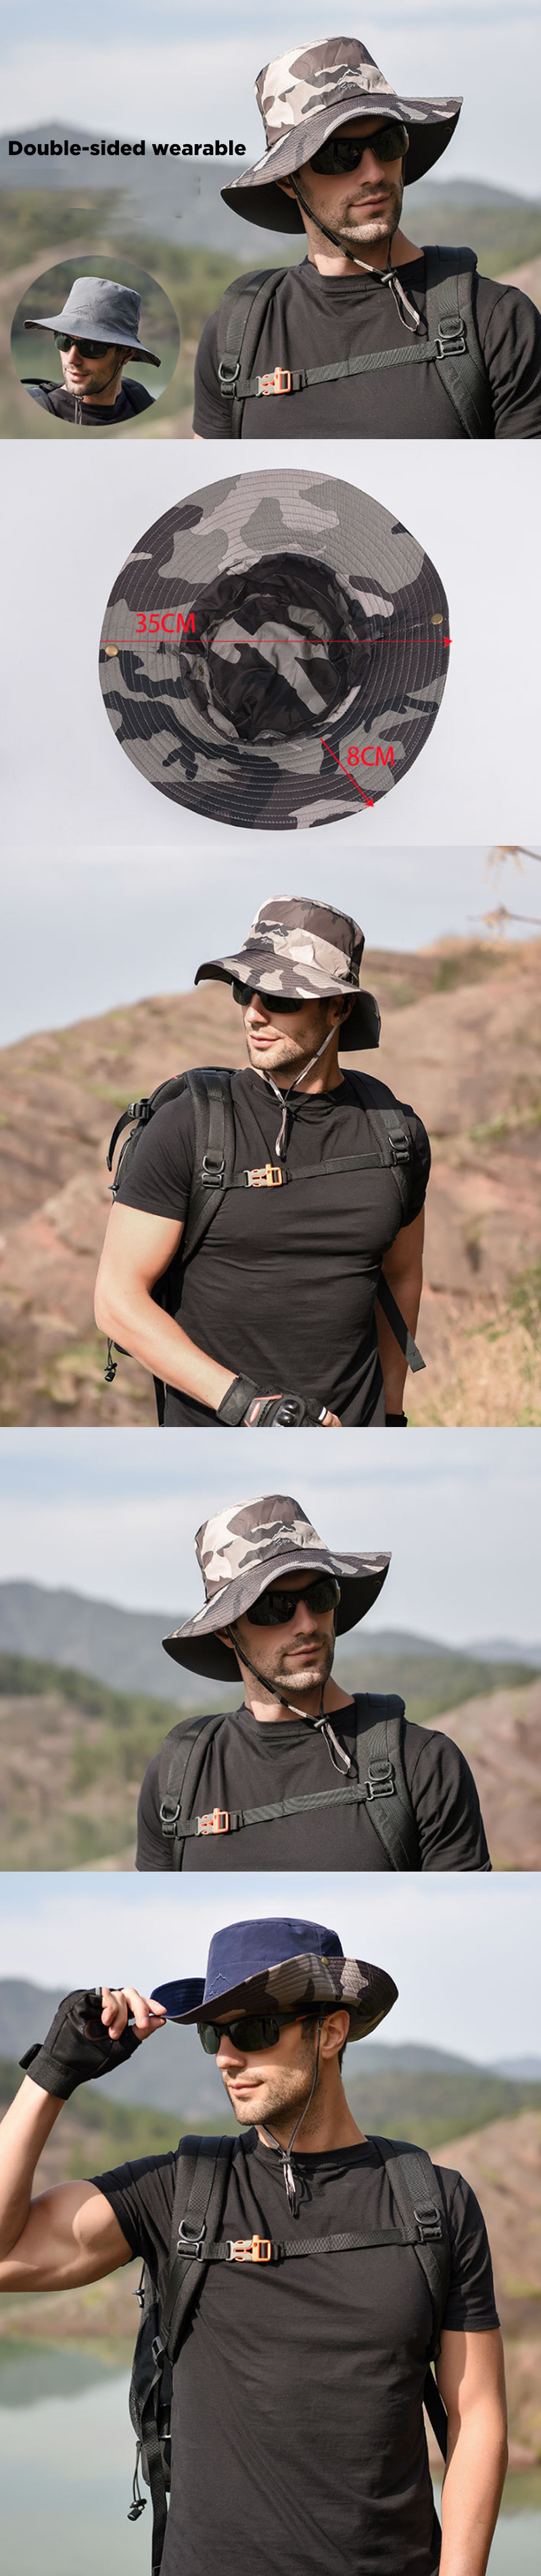 Tactical-Cap-Outdoor-Bucket-Hat-Folding-Portable-Hiking-Climbing-Sun-Protection-Floppy-Hat-1514812-1